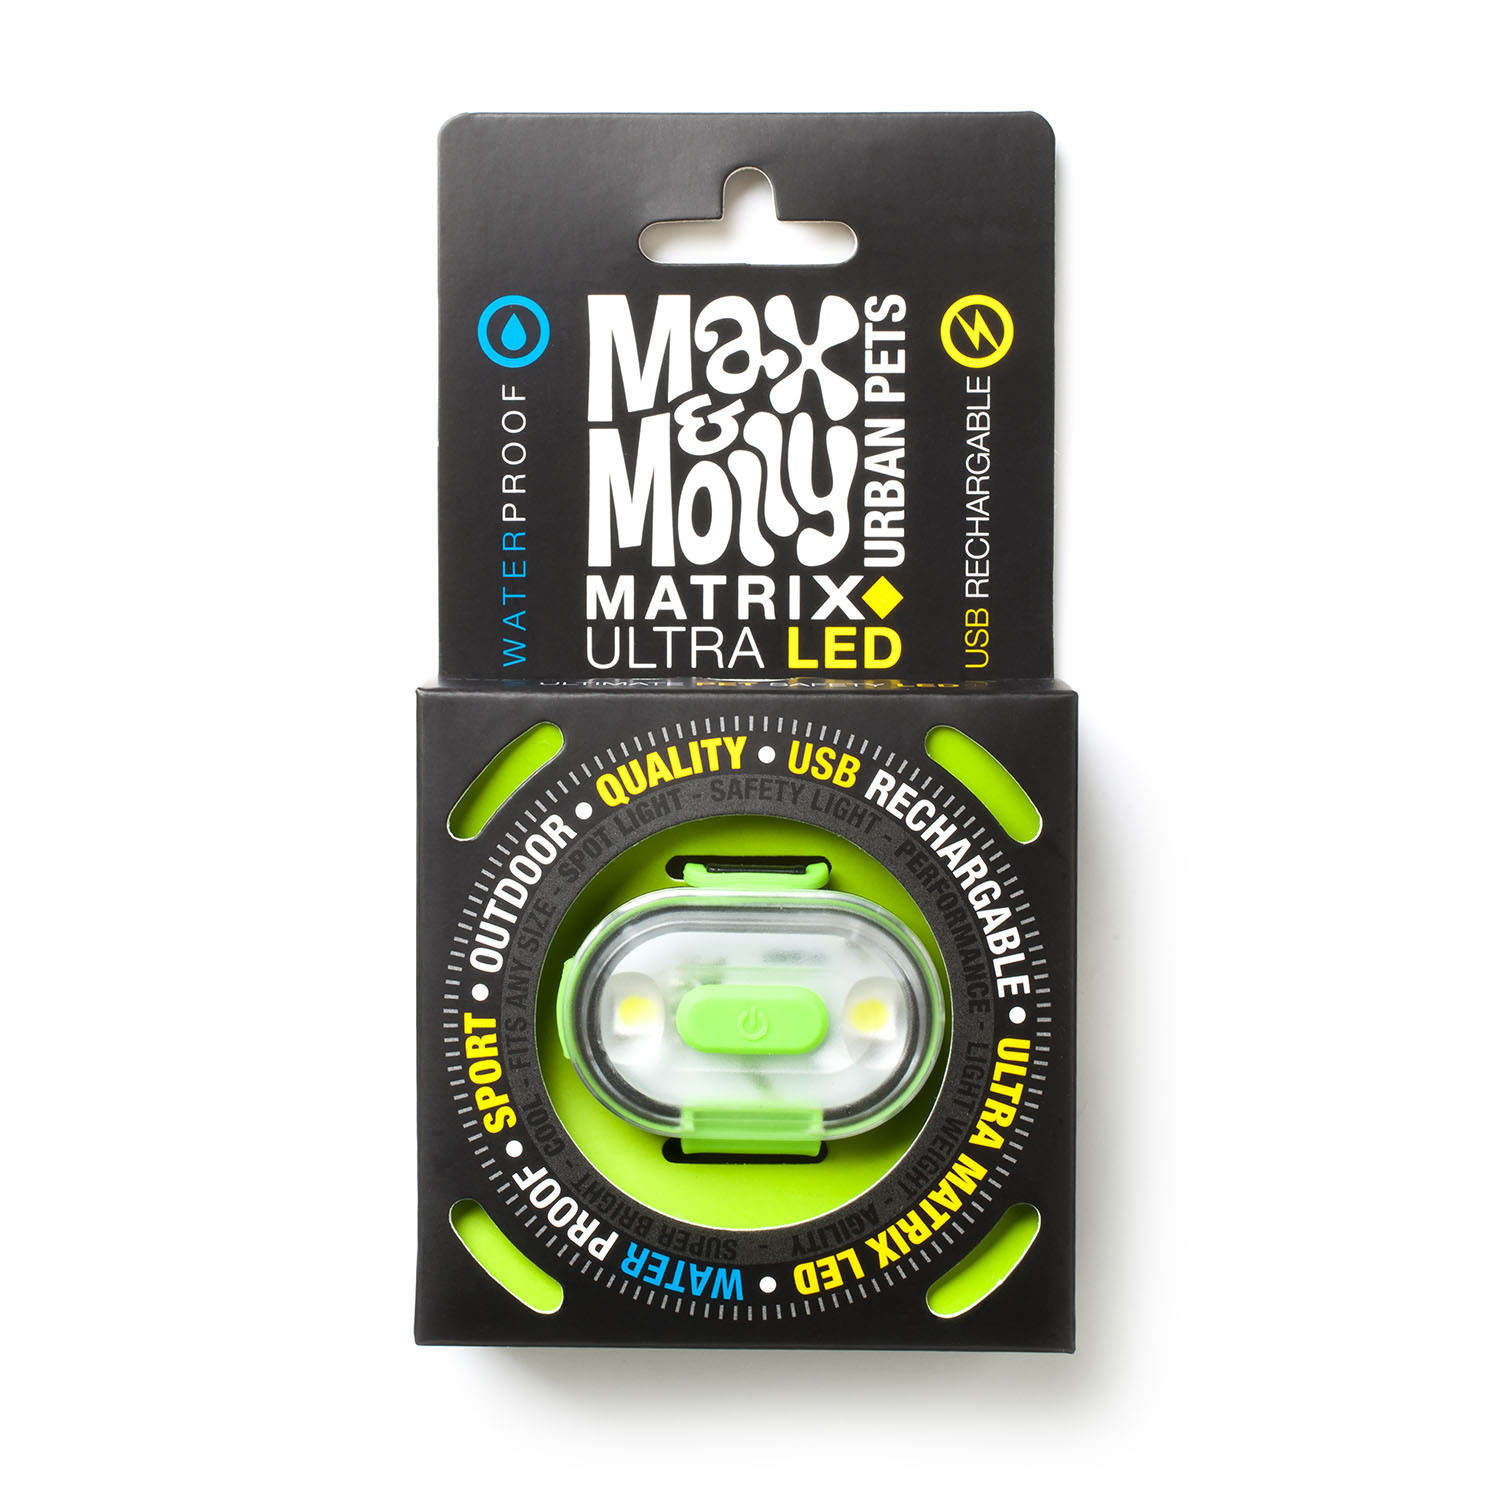 Max & Molly Matrix Ultra LED Harness and Collar Safety light image 0